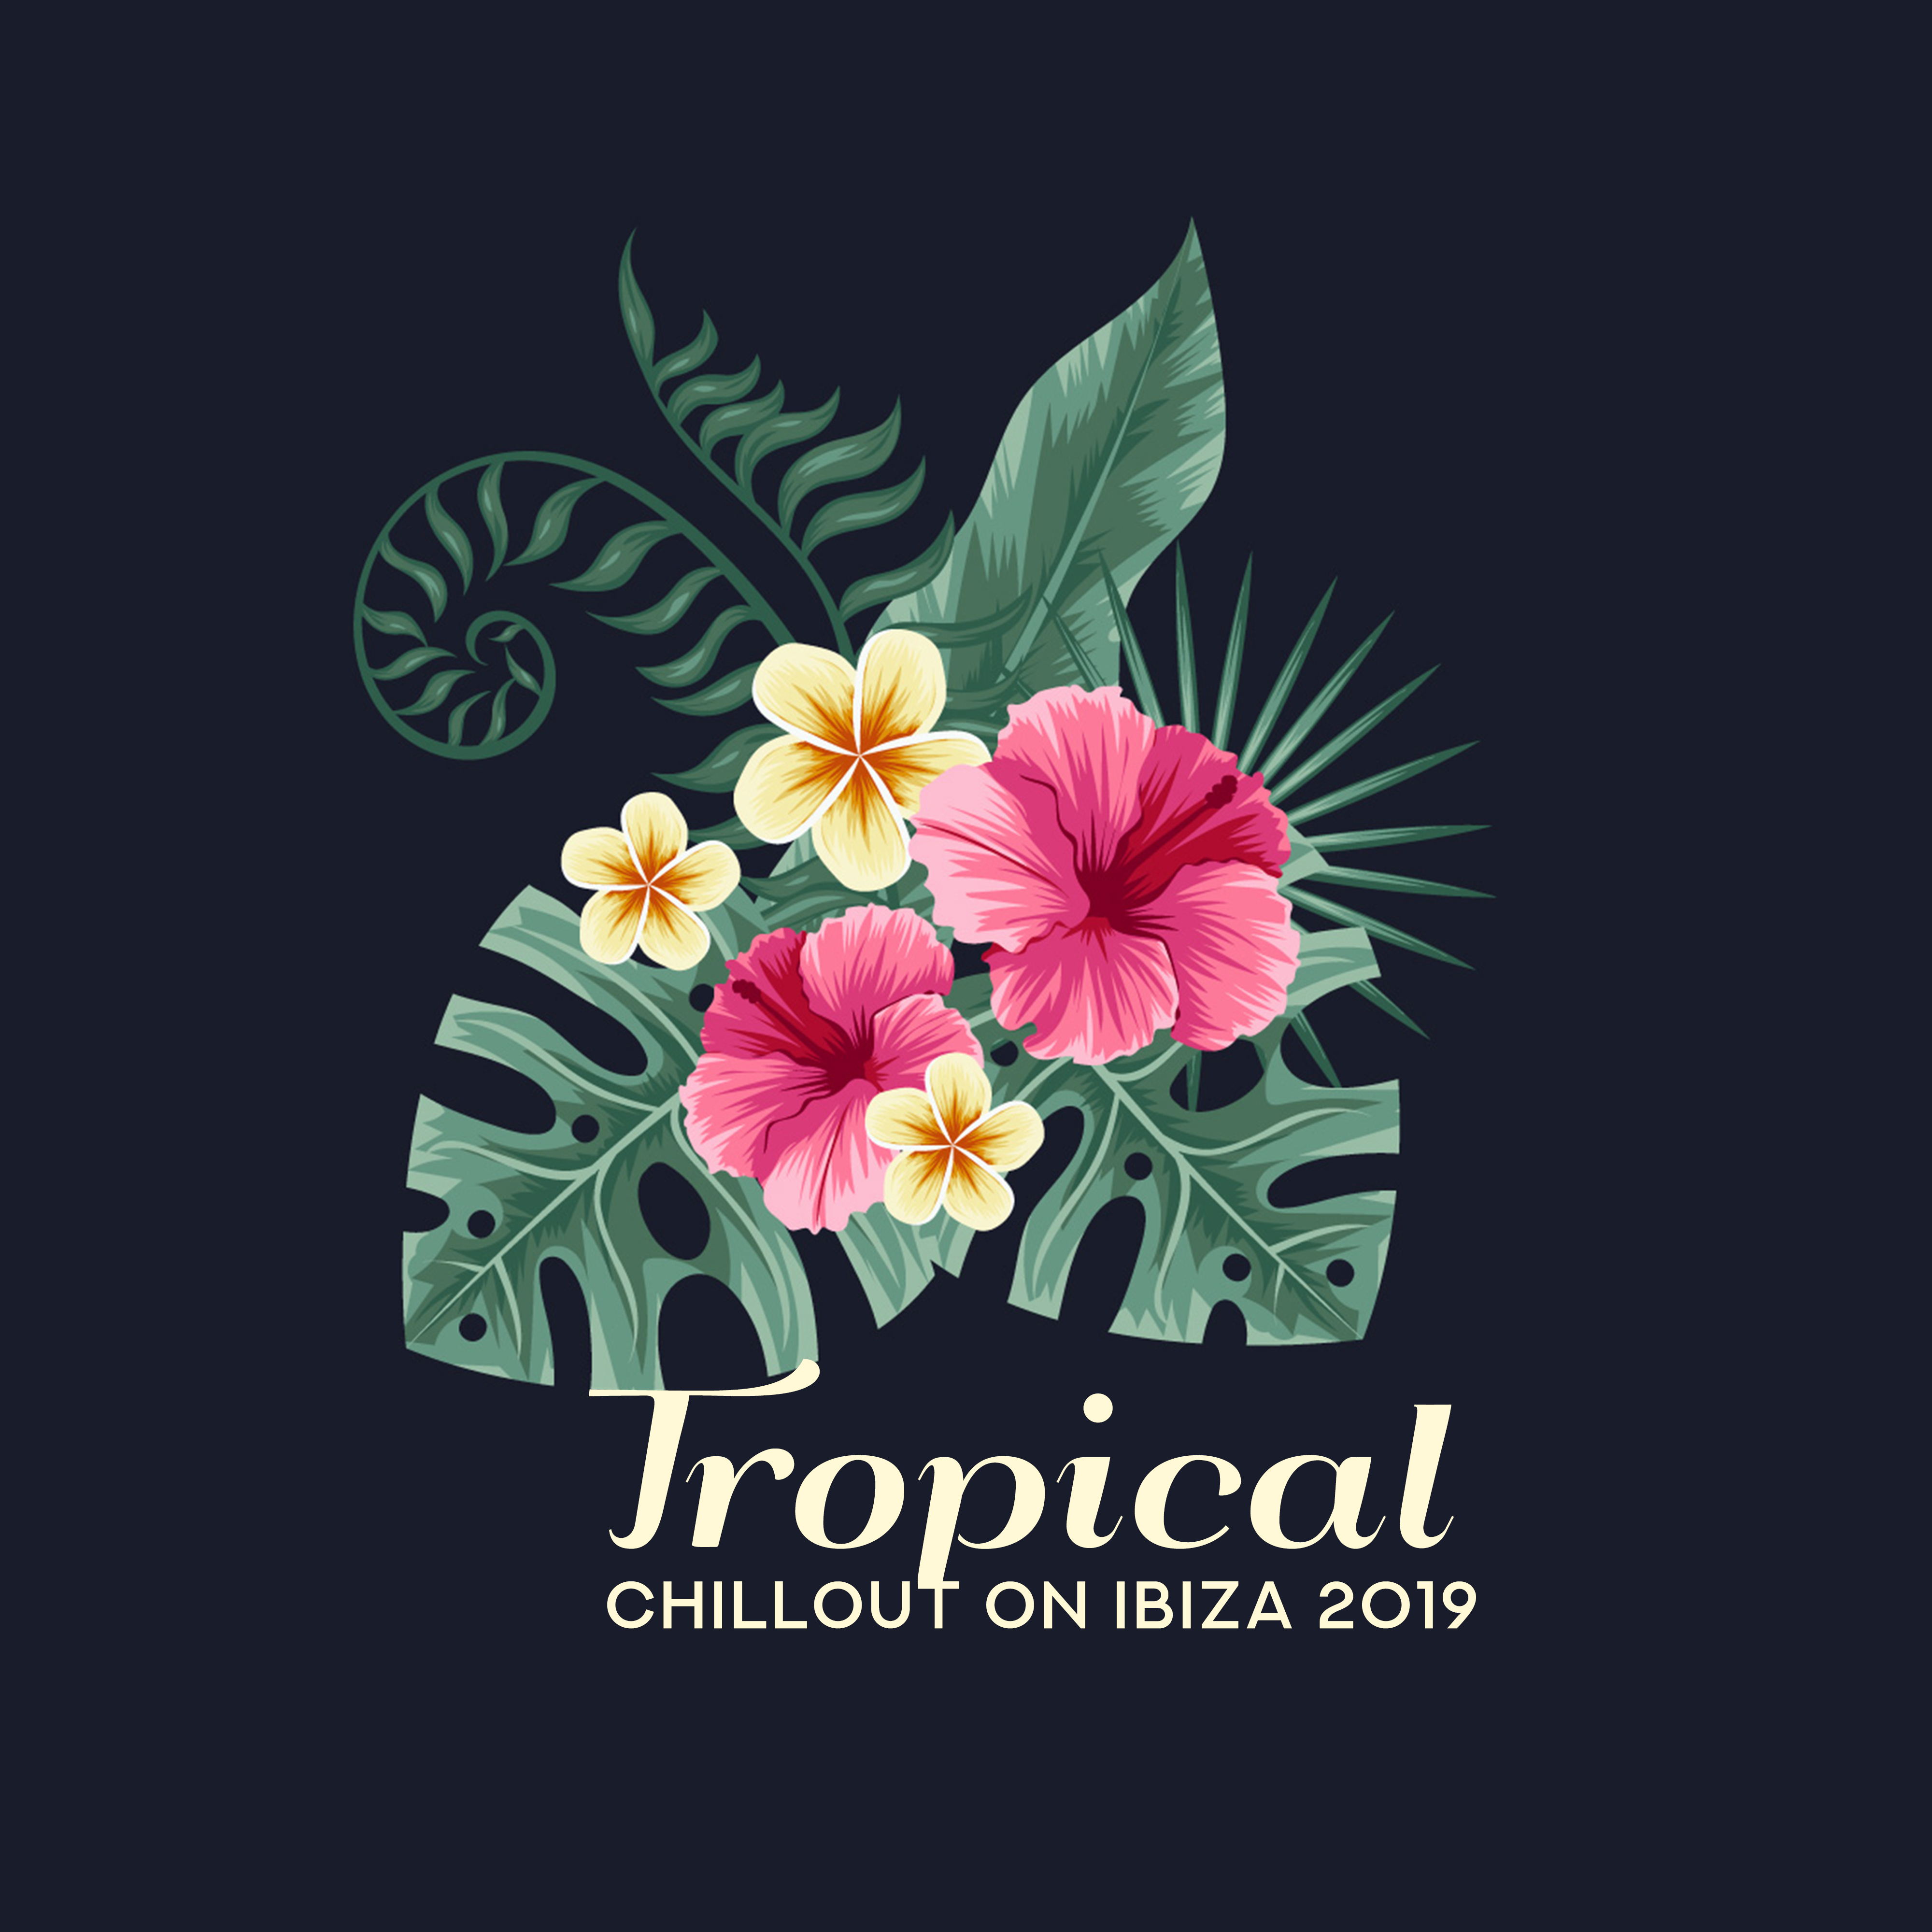 Tropical Chillout on Ibiza 2019 - Hot Sounds of Ibiza, Deep Chillout Music, Relaxing Melodies for Complete Rest and Relaxation, Music to Calm Down and De-stress